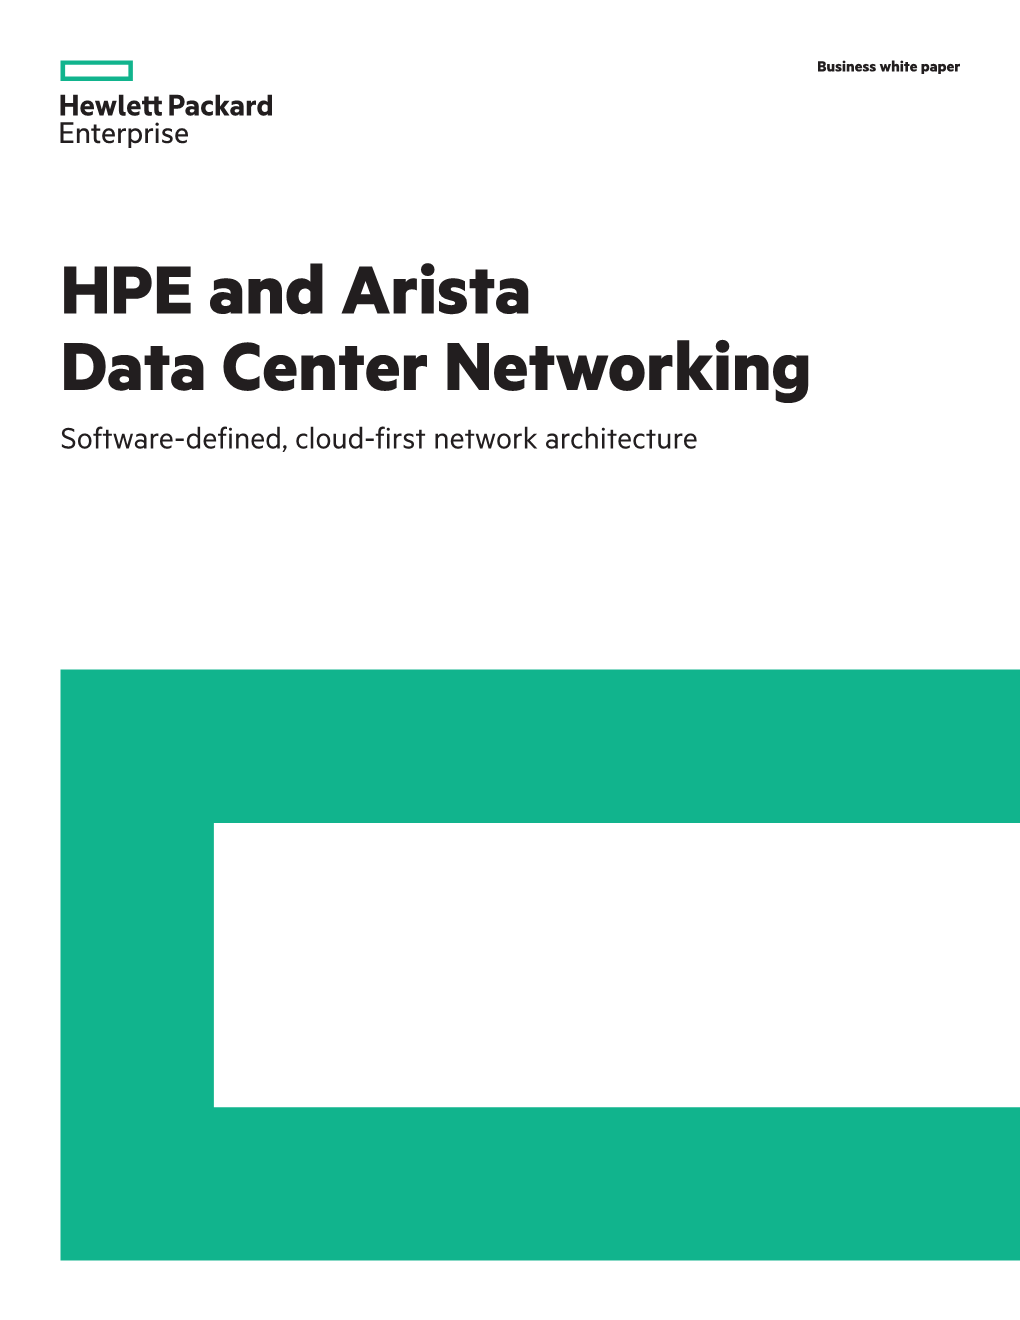 HPE and Arista Data Center Networking Software-Defined, Cloud-First Network Architecture Business White Paper